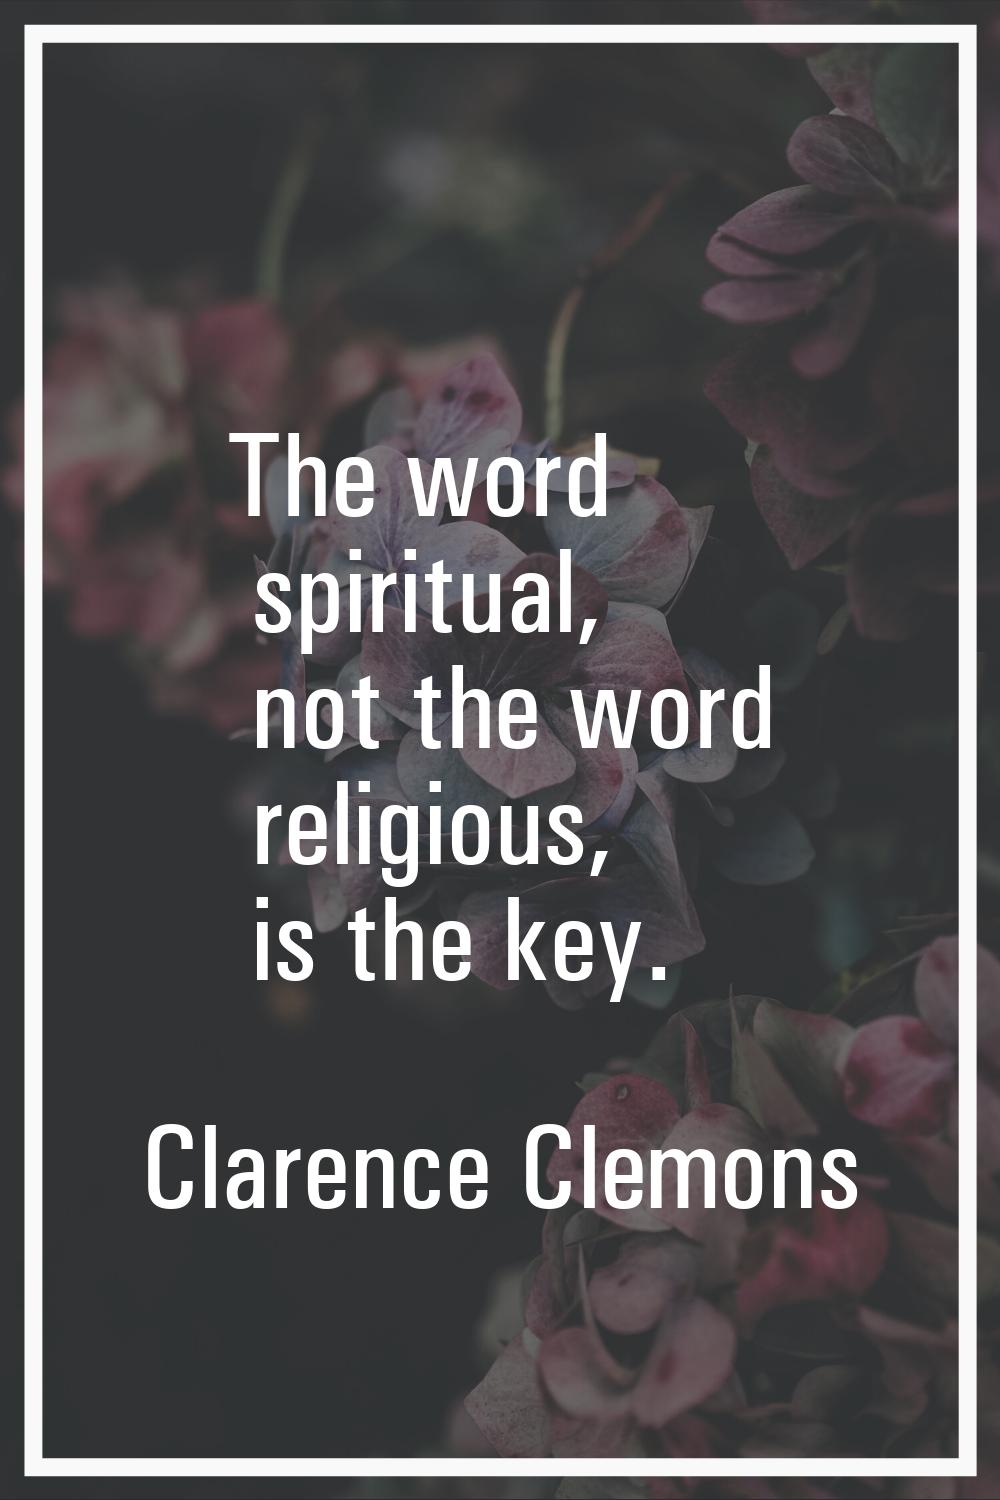 The word spiritual, not the word religious, is the key.